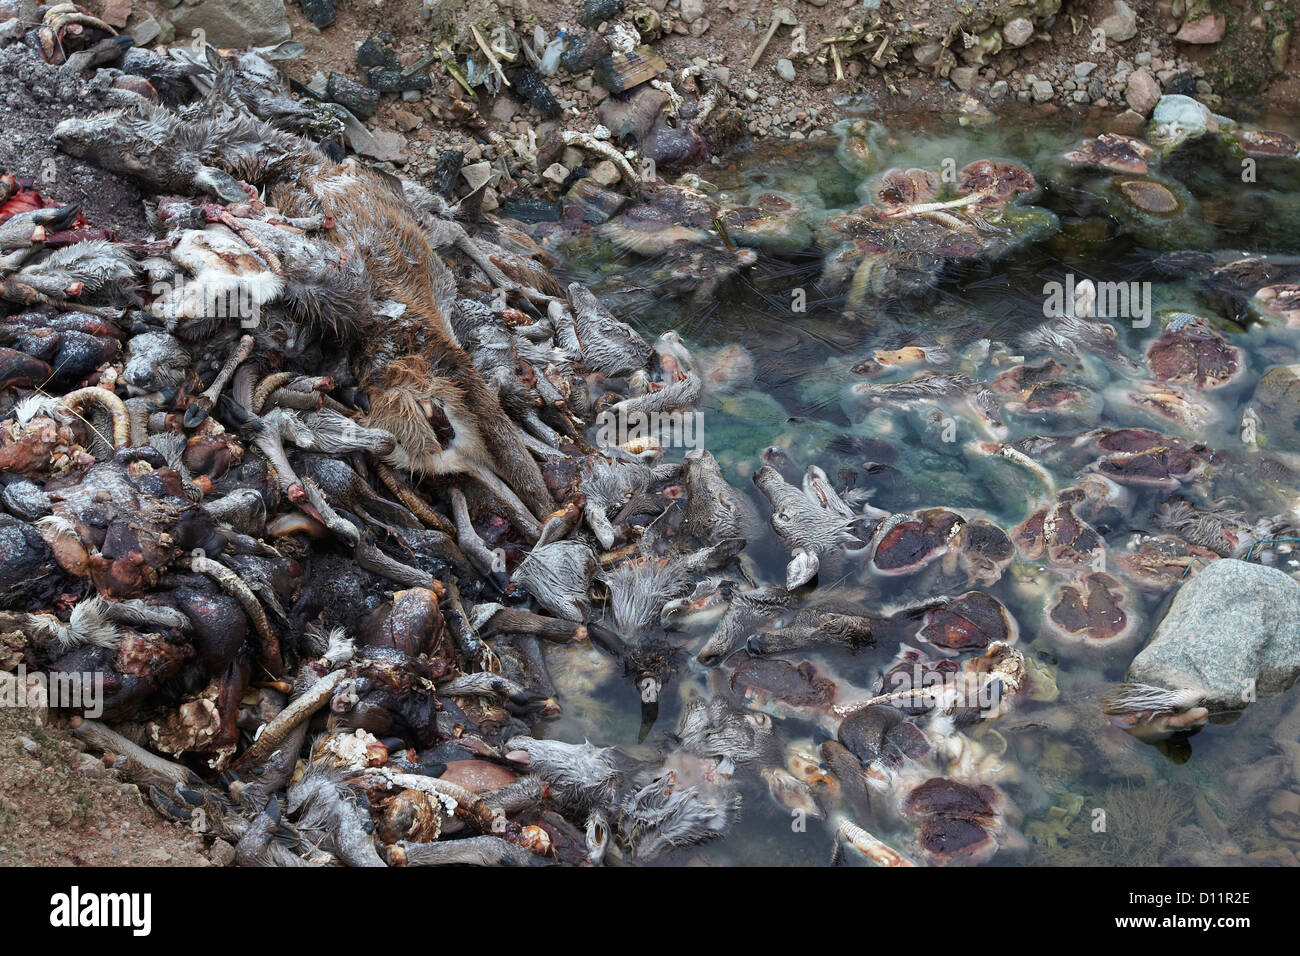 Red deer, Cervus elaphus, carcases and offal dumped in a pit near Blair Athol, Scotland, UK Stock Photo